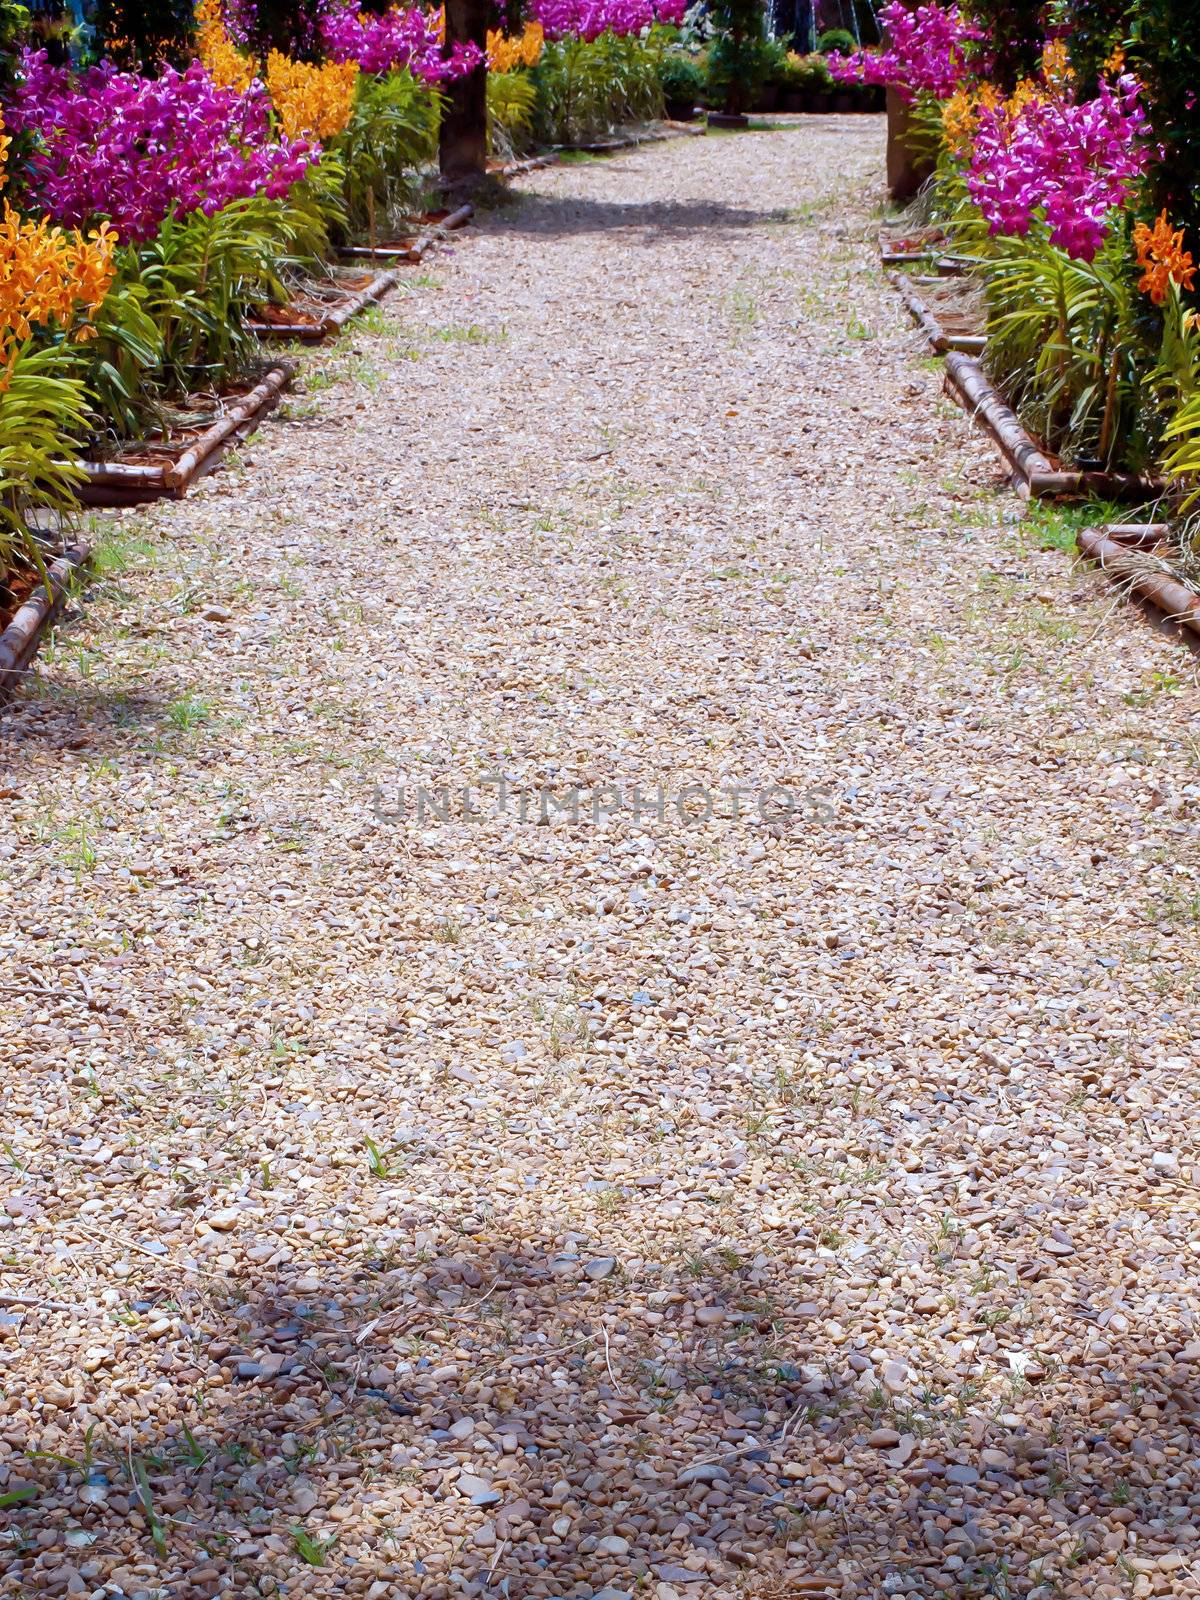 Walkway among orchid flowers in the park